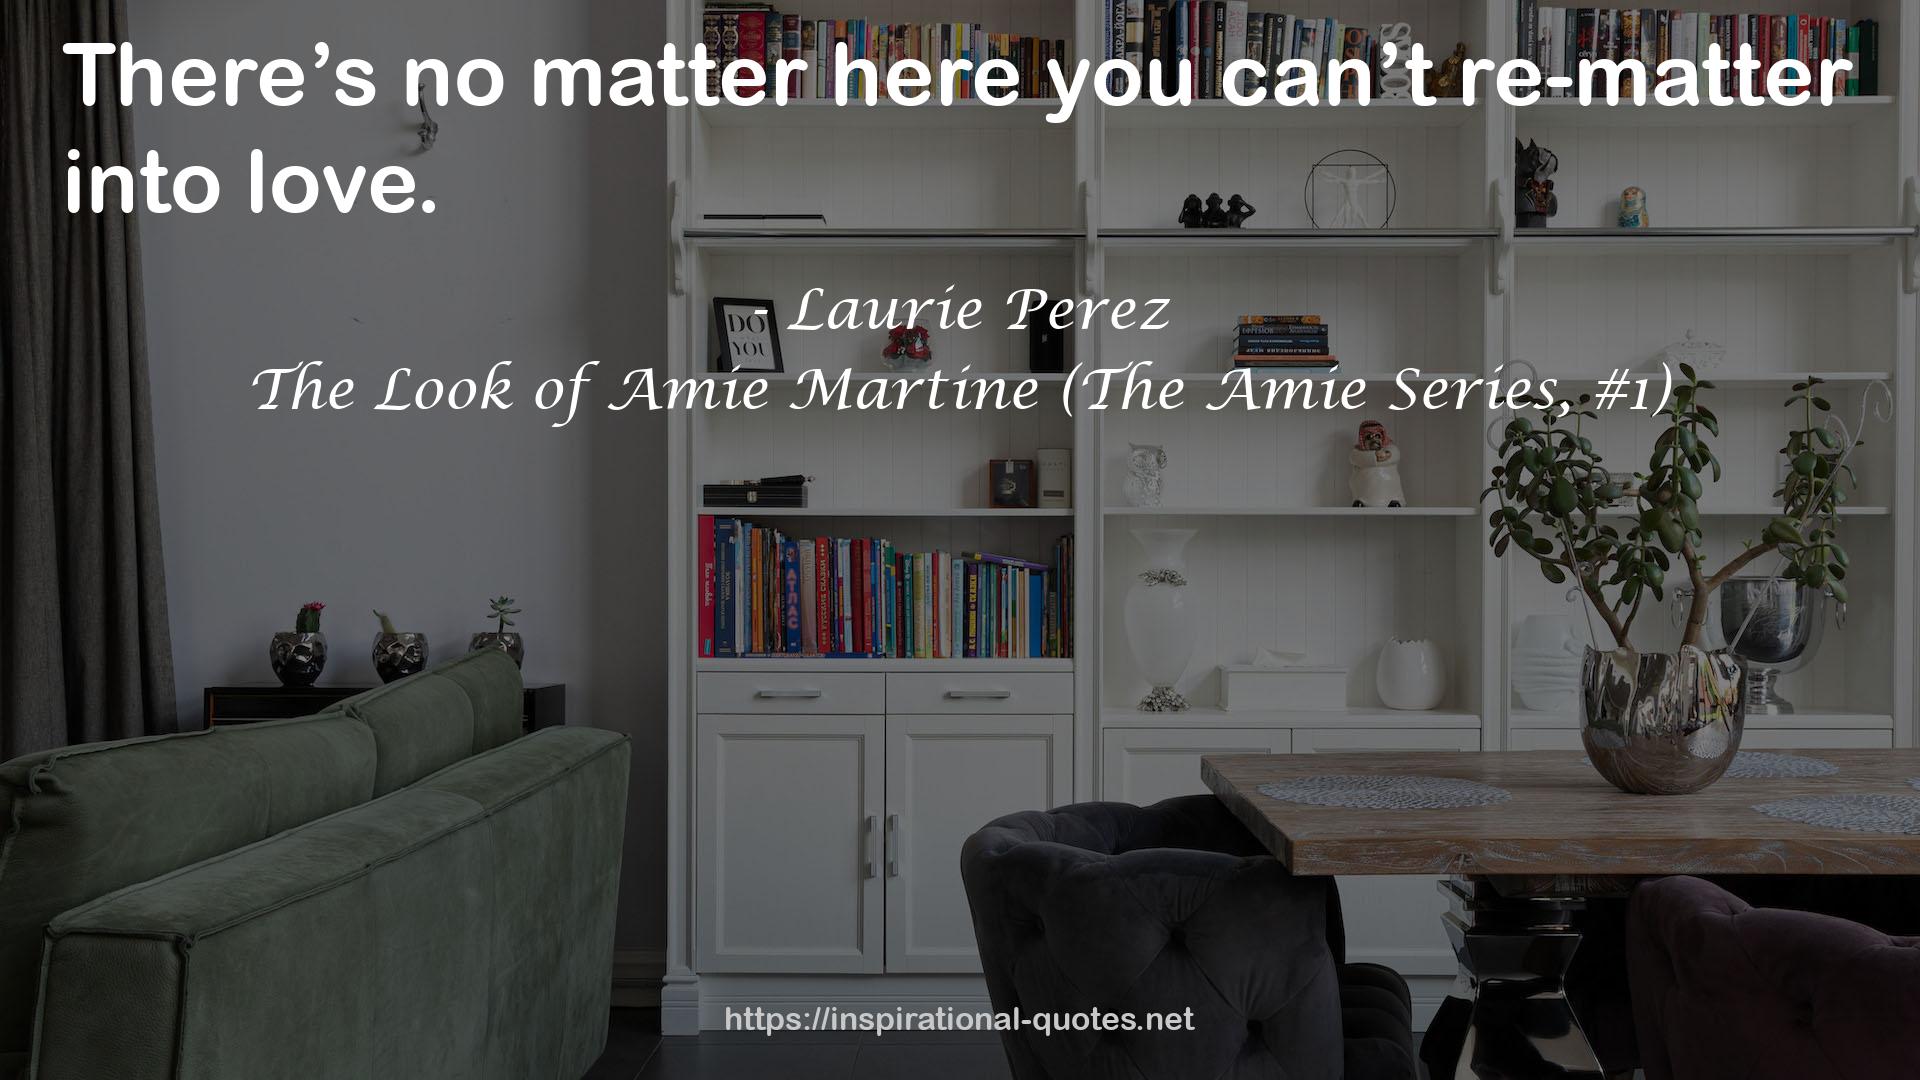 The Look of Amie Martine (The Amie Series, #1) QUOTES